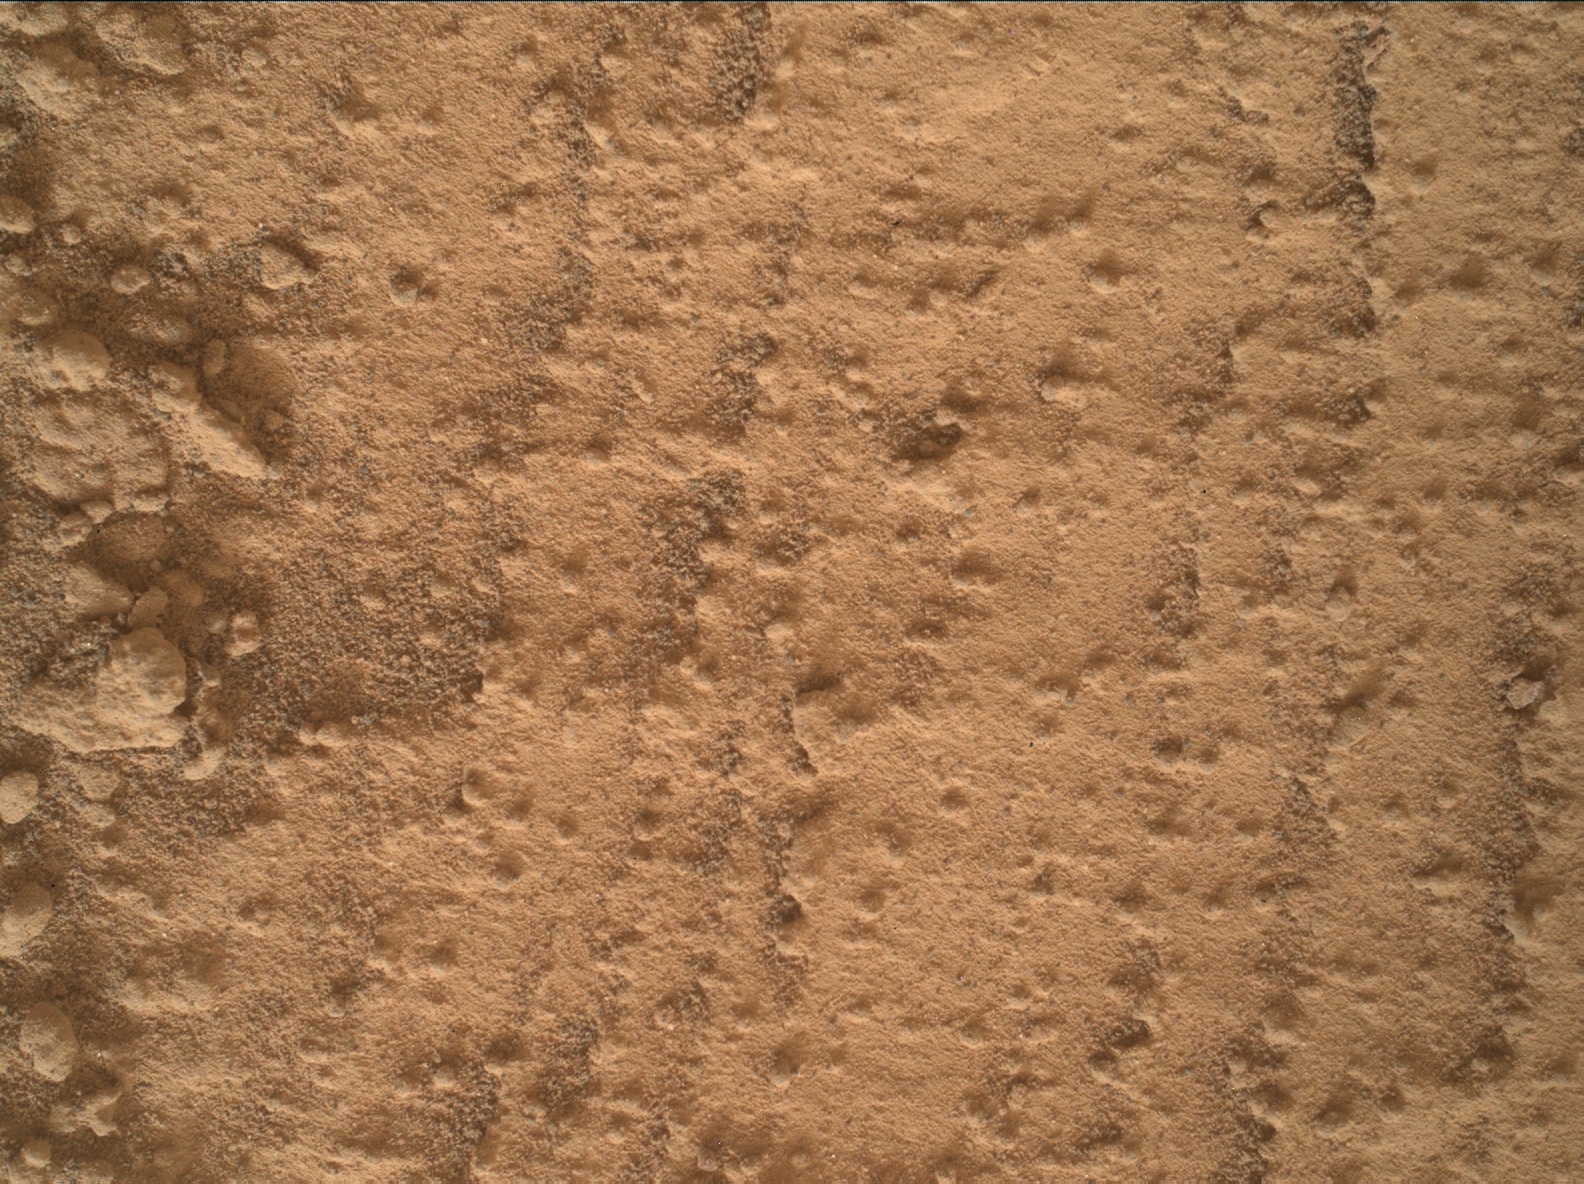 Nasa's Mars rover Curiosity acquired this image using its Mars Hand Lens Imager (MAHLI) on Sol 3473